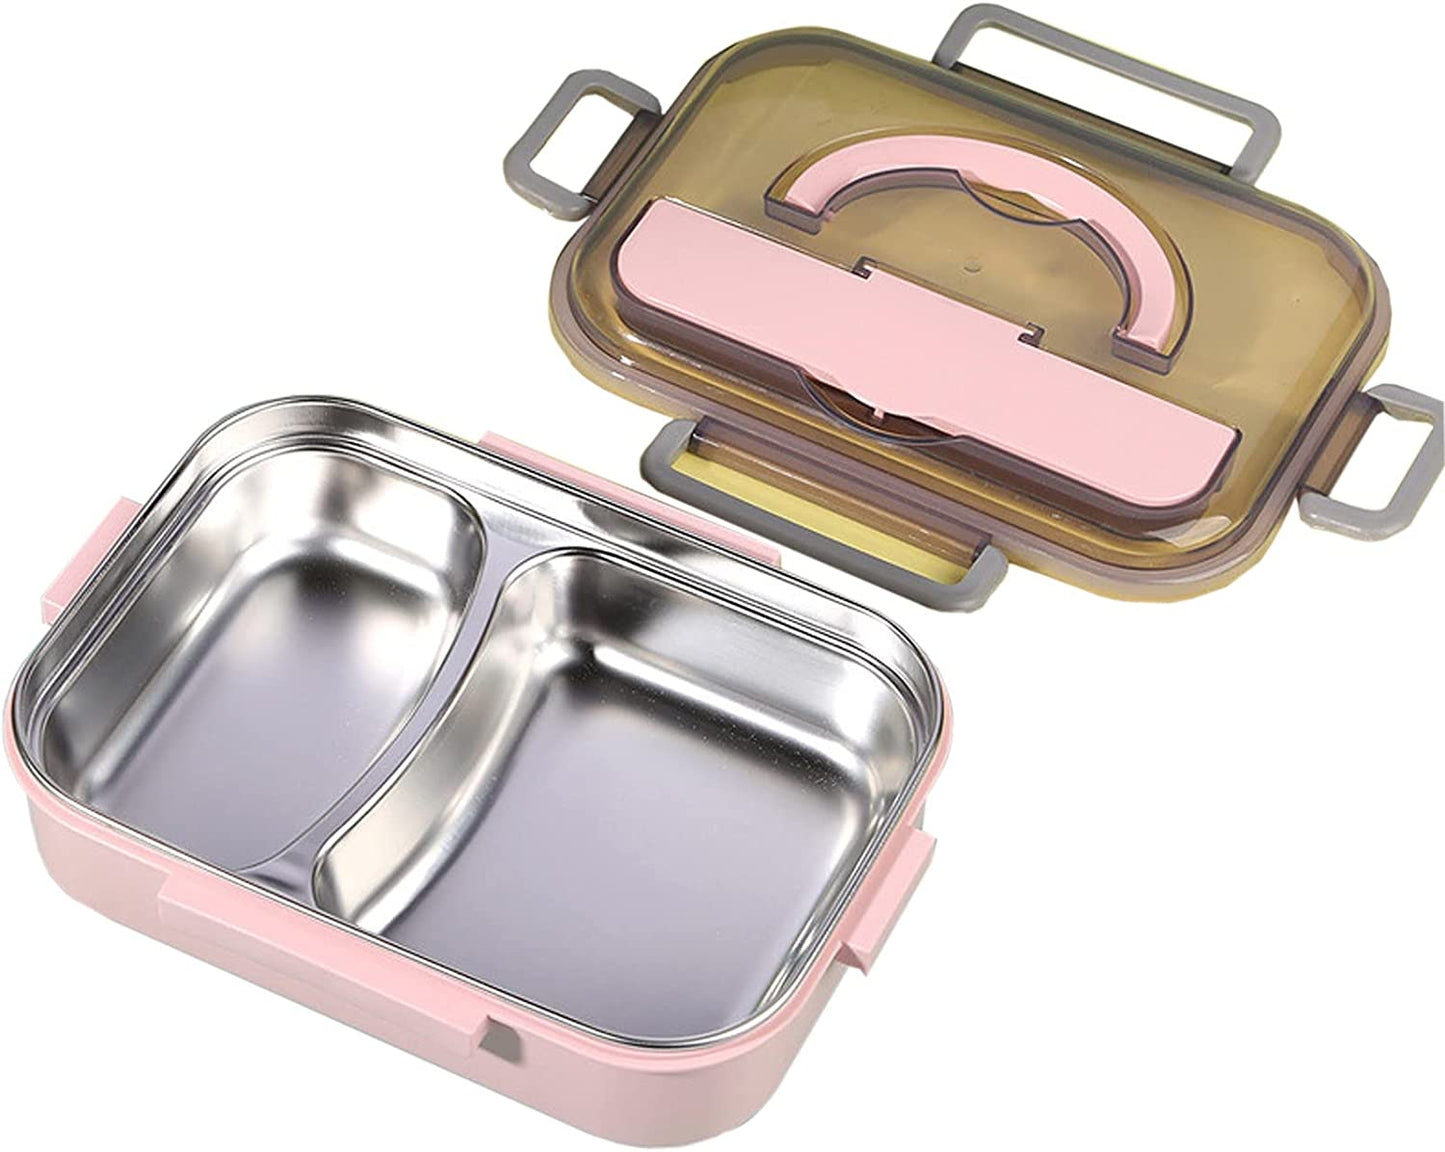 Lunch Box Thermal Insulation Bento Box Tableware Set Portable Lunch Containers For Kid Adult Student Children Keep Food Warm (2-Pink)